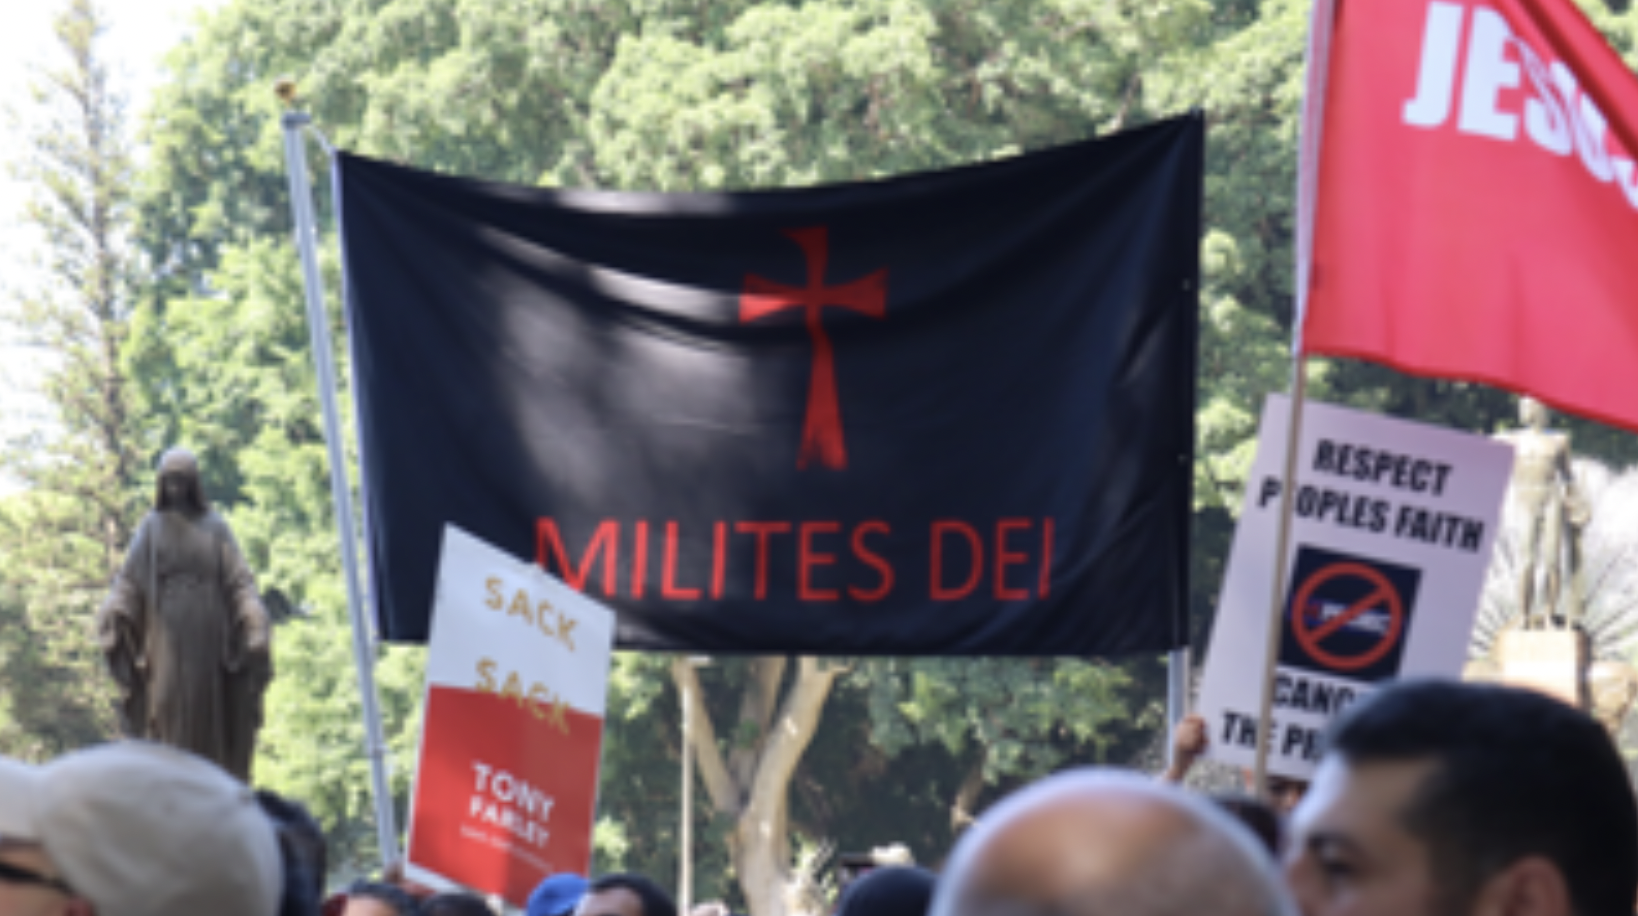 The 18th March Hyde Park rally. Milites Dei is Latin for “Soldiers of God”